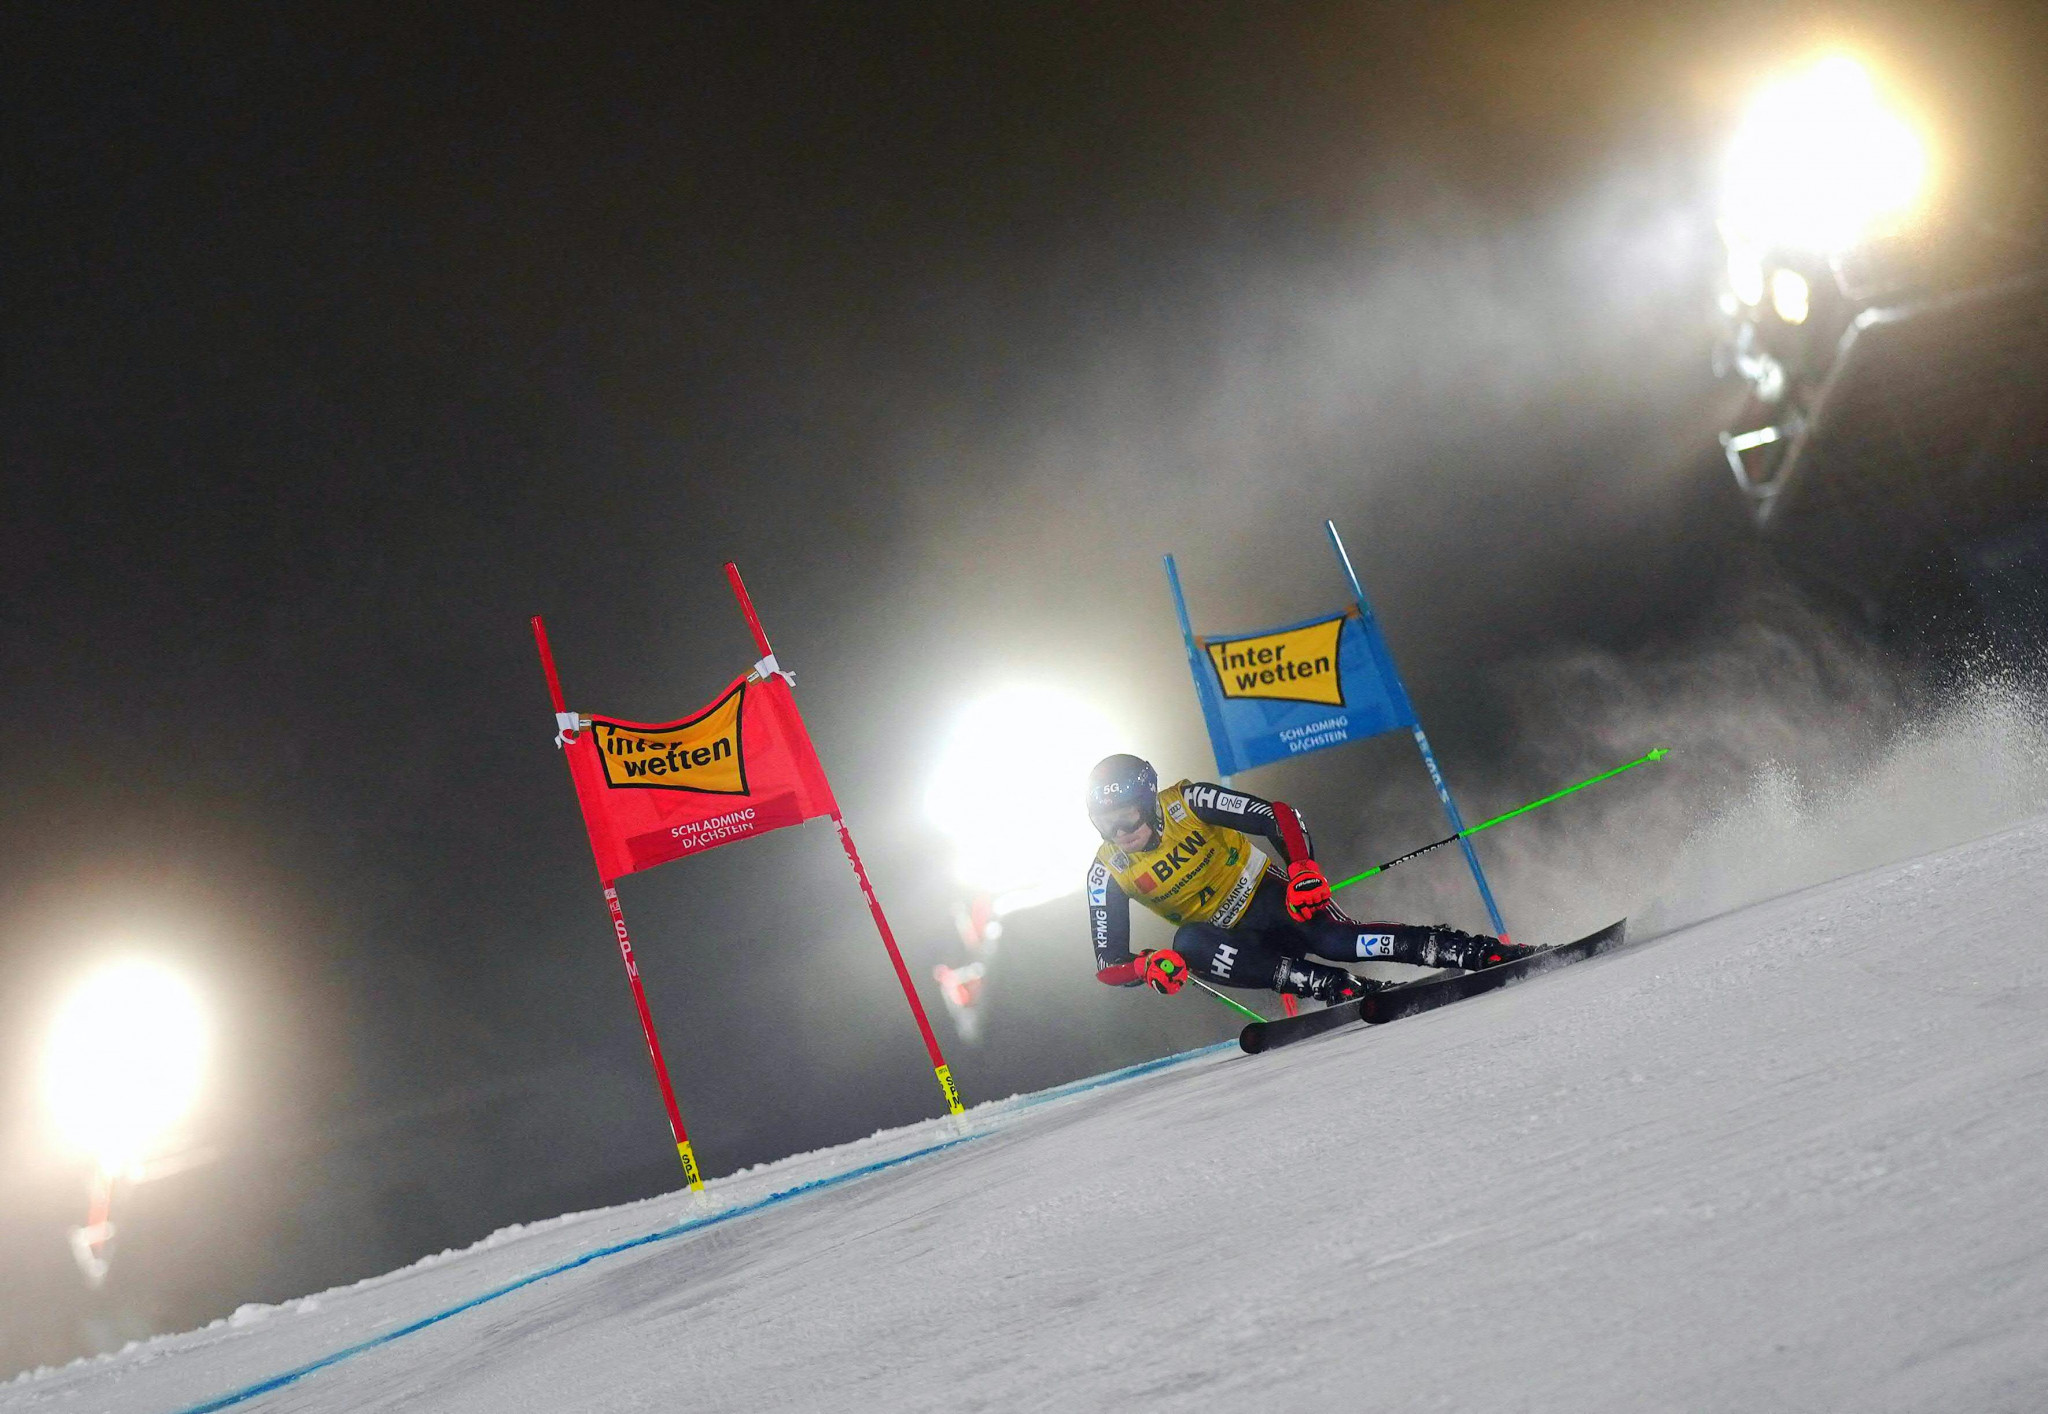 FIS warns manufacturer for logo request at Alpine Ski World Cup in Schladming